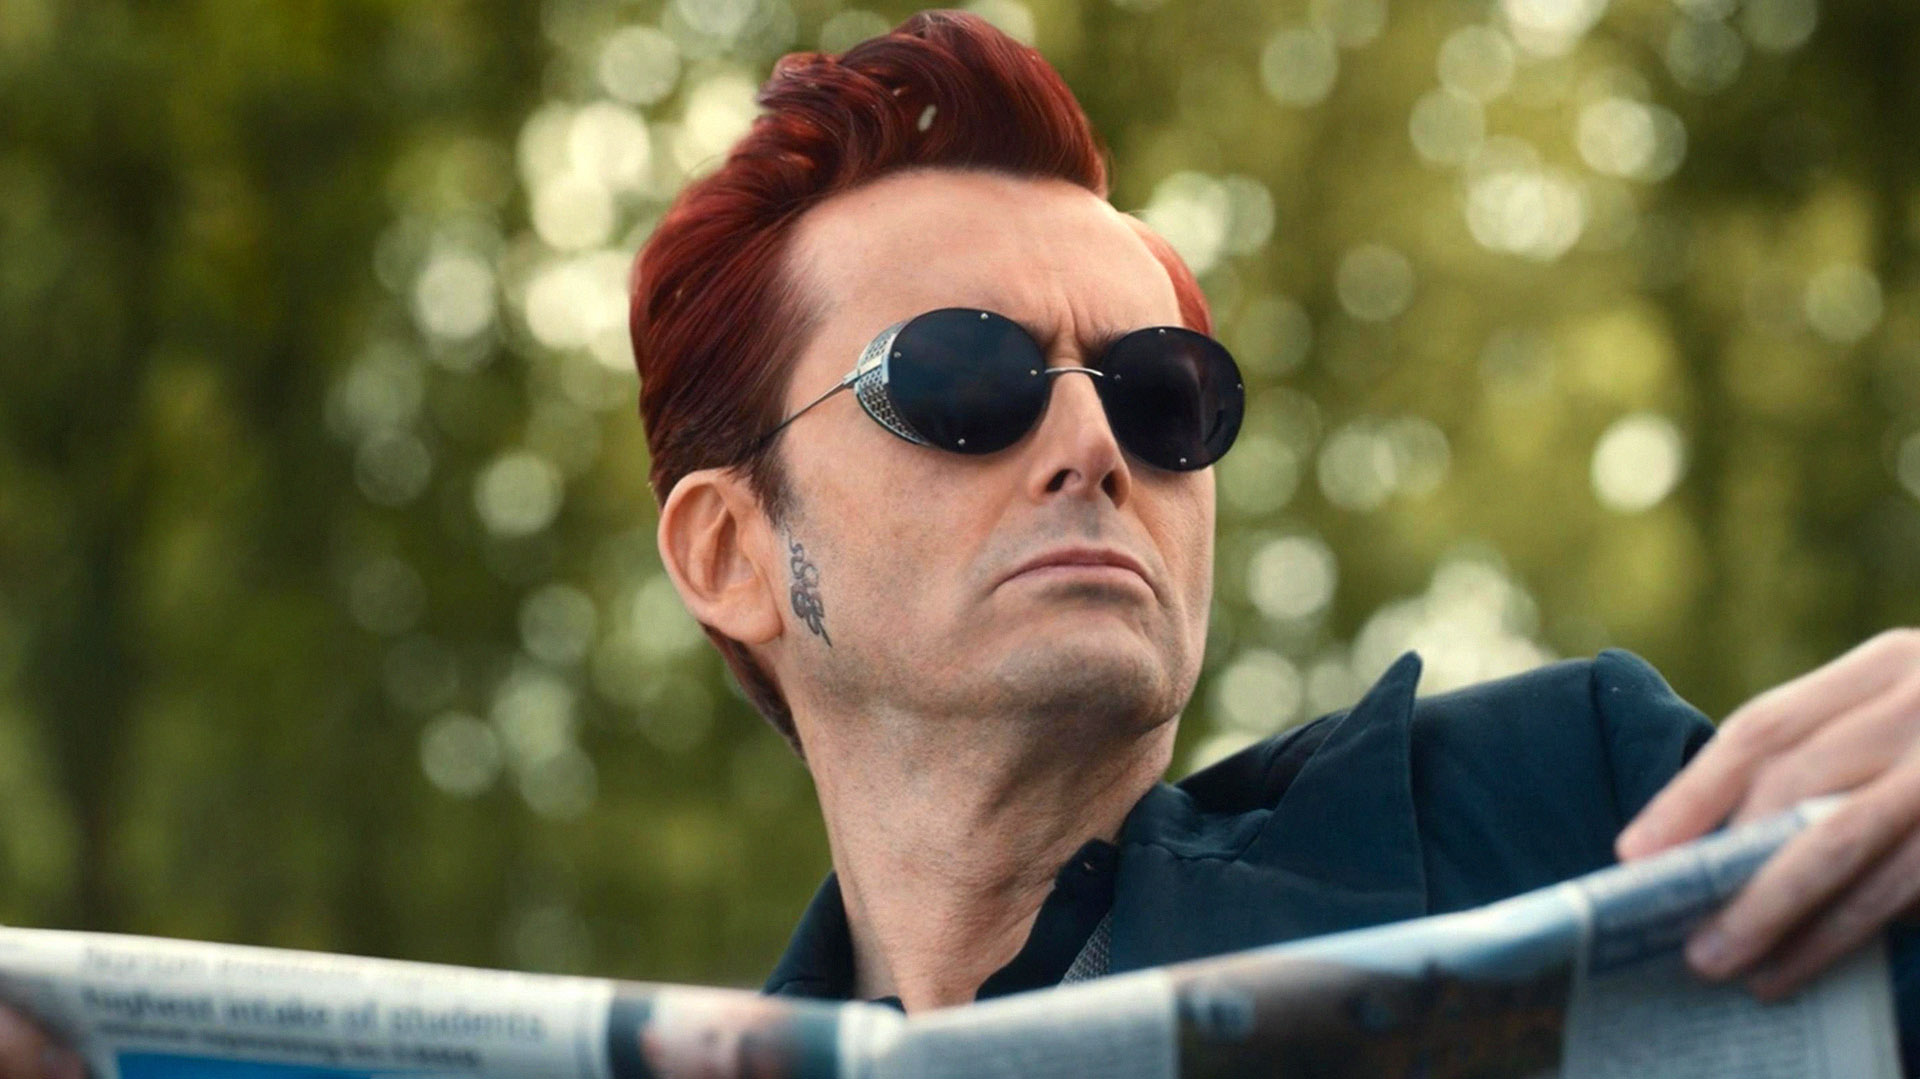 Liked Good Omens Season 2? Here's the List of 10 Shows to Watch Next